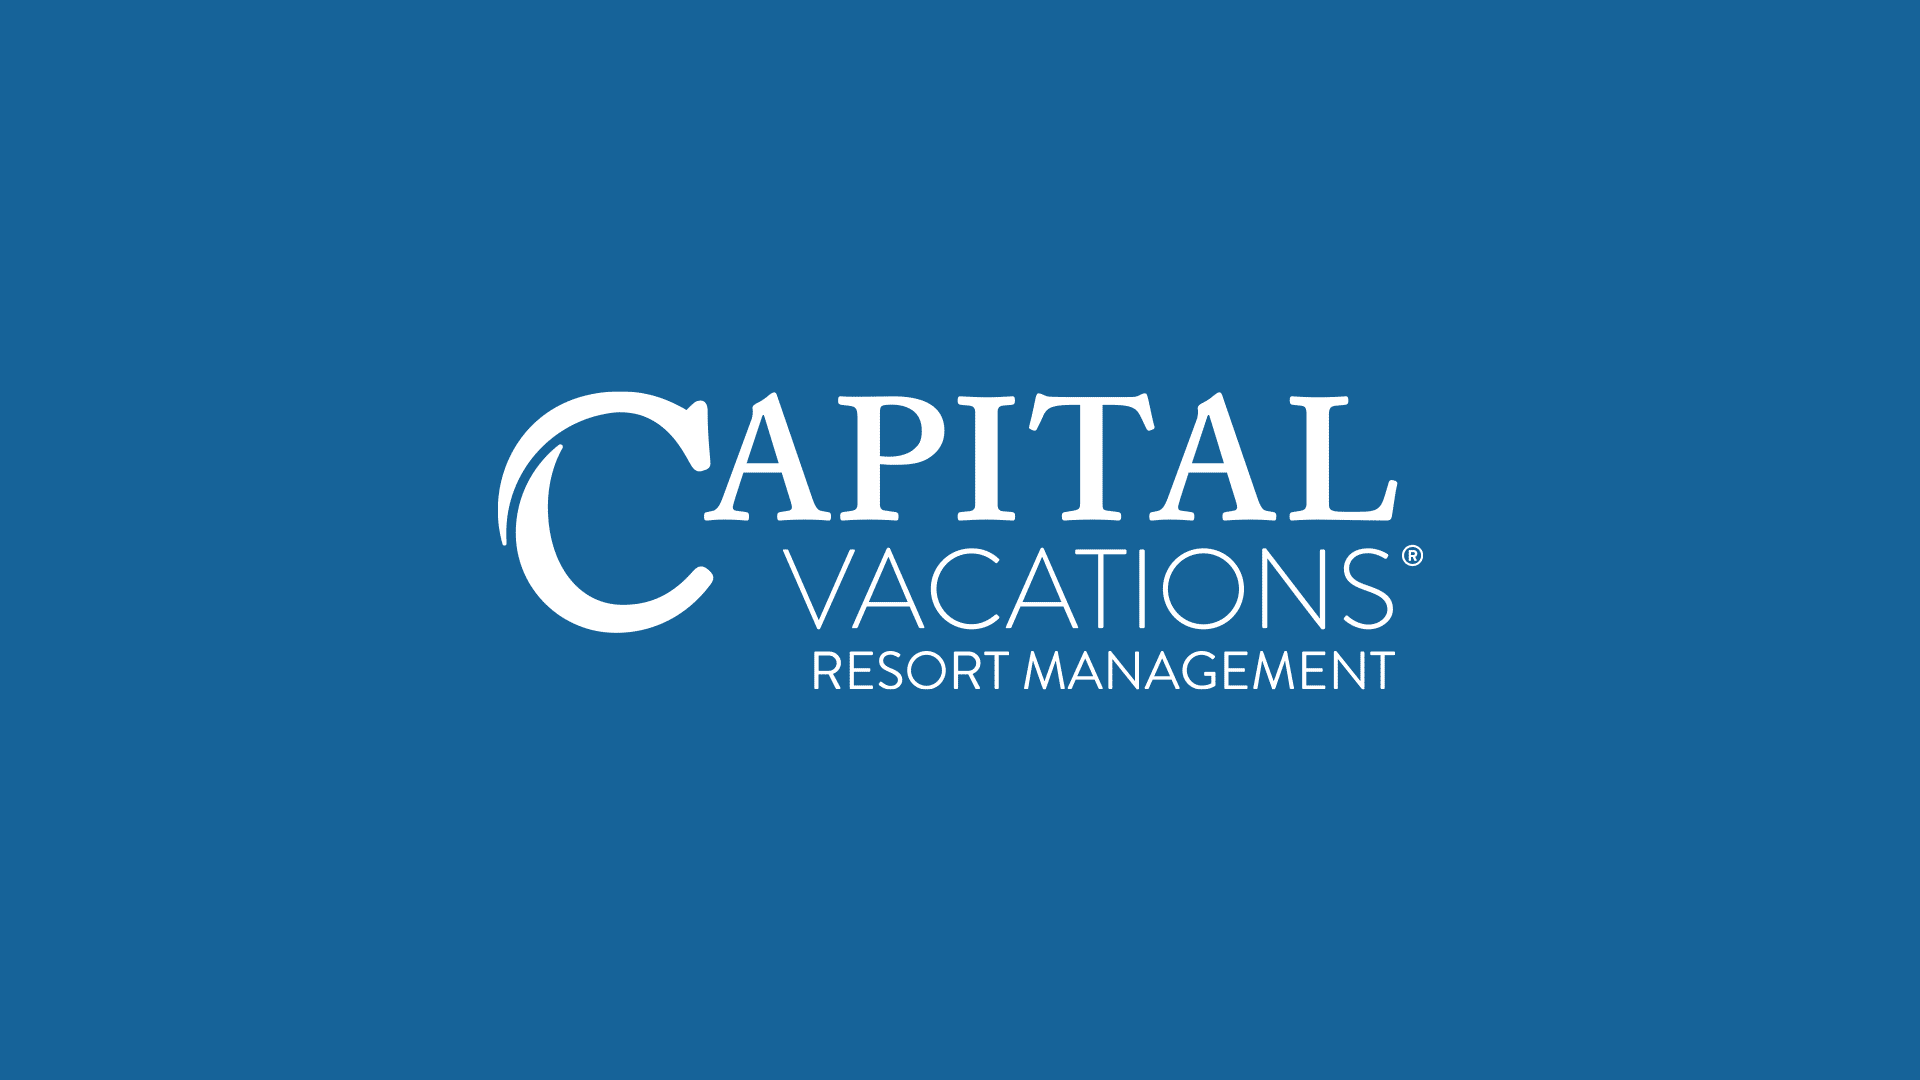 Capital Vacations announces it is on pace to sell 10,000 HOA-owned intervals in 2021 for its managed resorts that opted into their Guaranteed Sales program